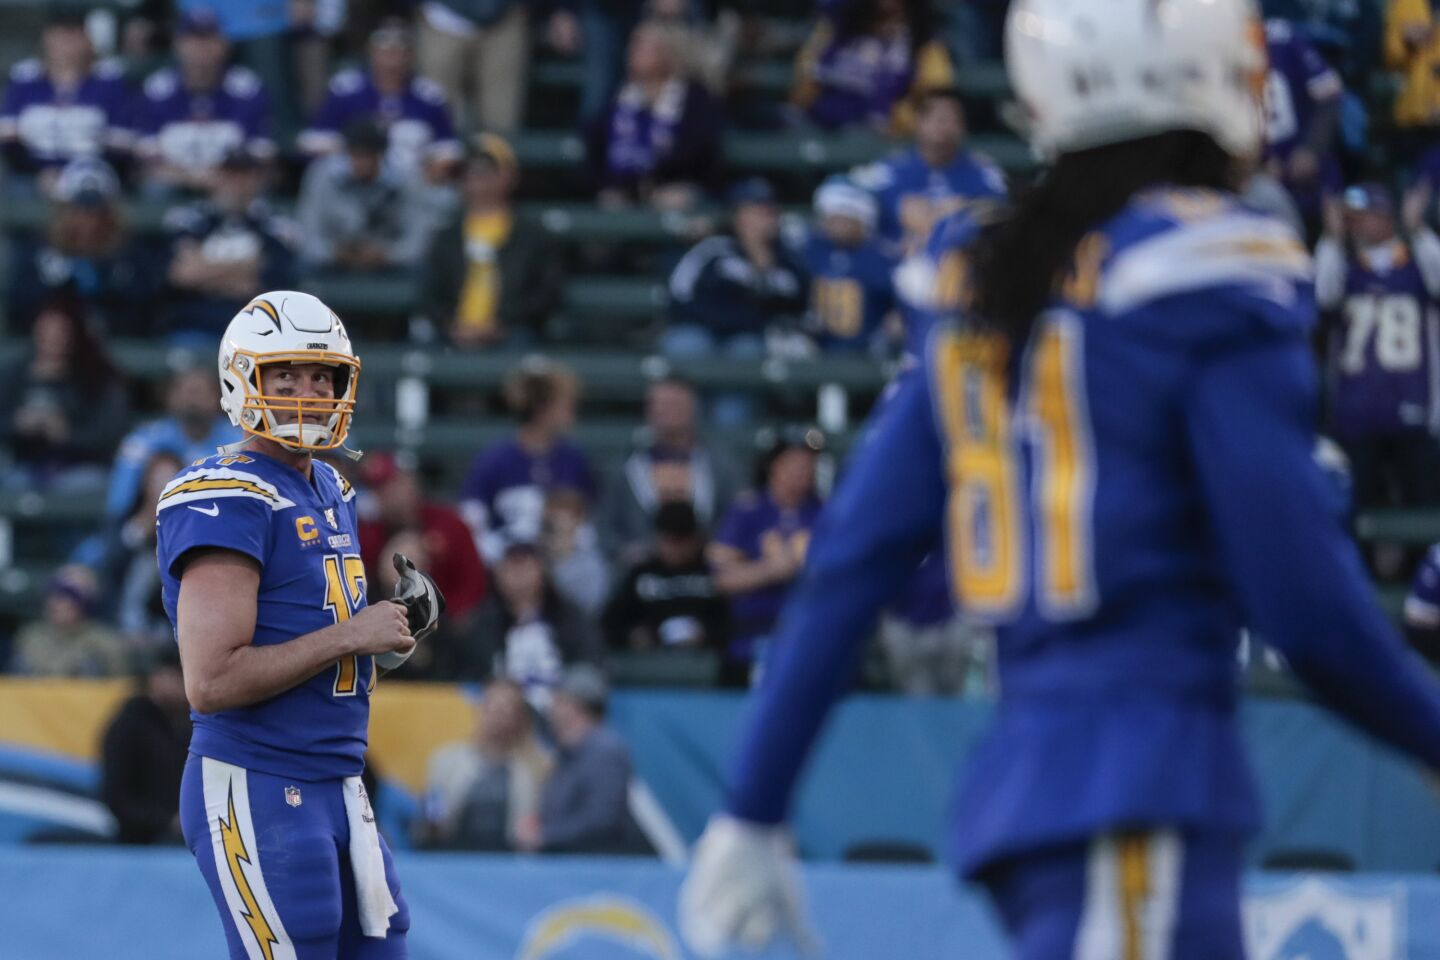 Chargers quarterback Philip Rivers walks off the field after throwing his third interception during a 39-10 loss to the Minnesota Vikings.